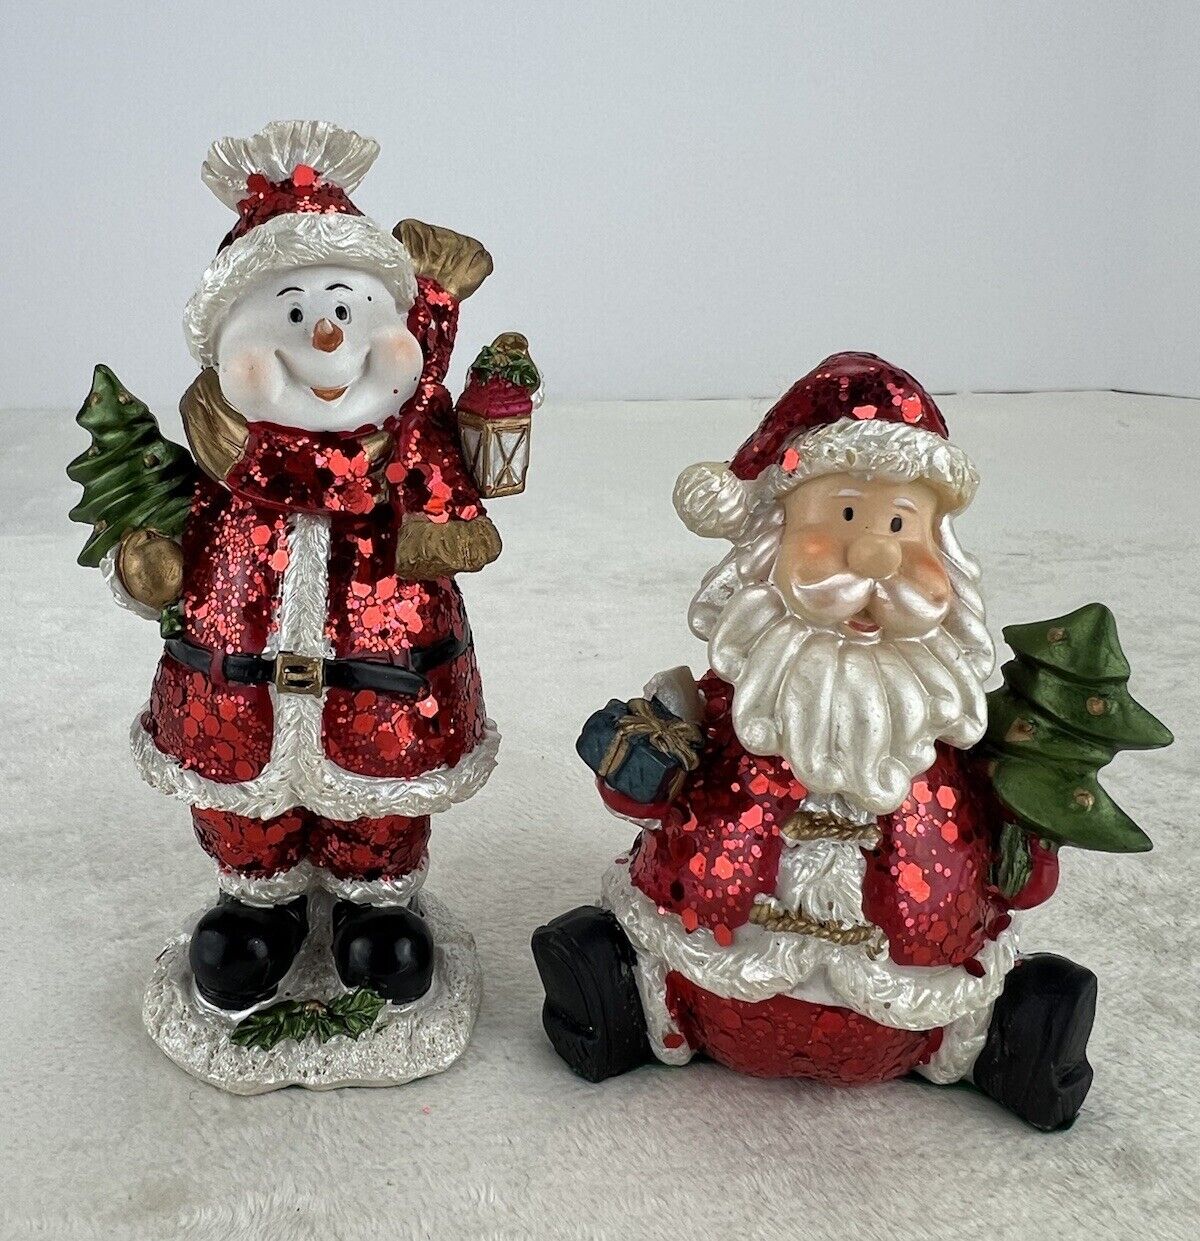 Vintage Christmas Bobblehead Santa Claus and Snowman Both in Red Glitter Coats